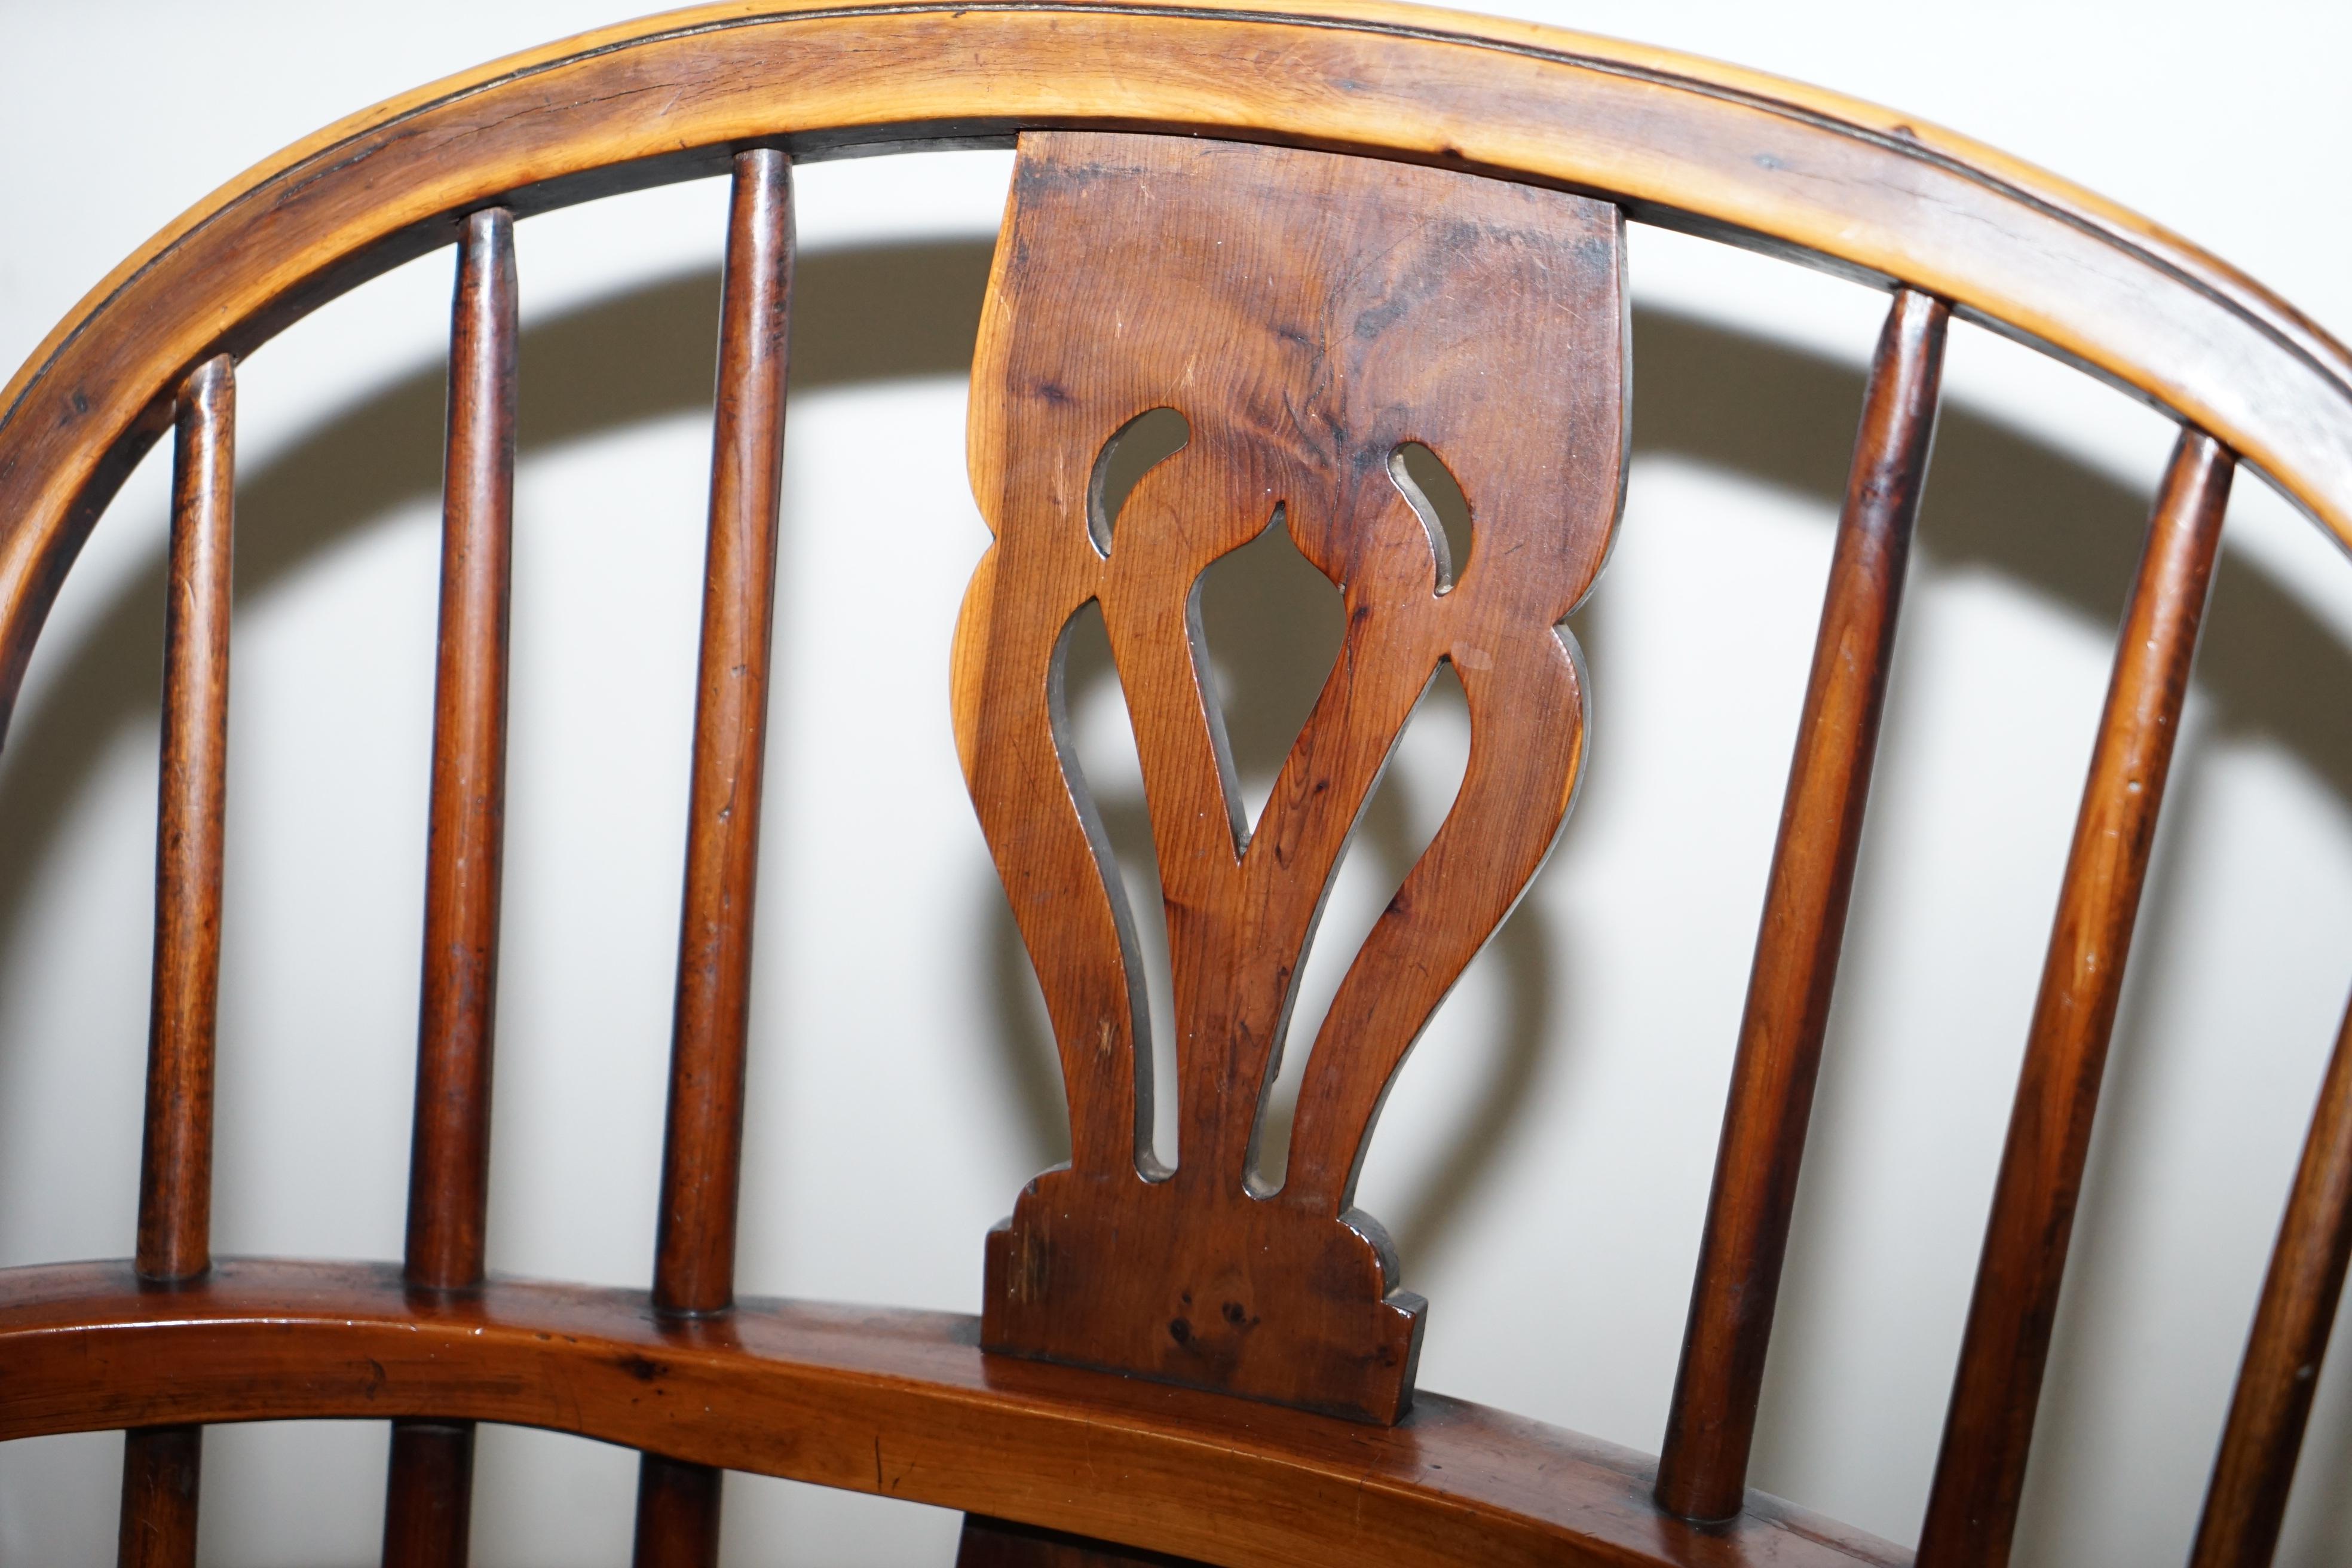 Mid-19th Century 1 of 6 Burr Yew Wood Windsor Armchairs circa 1860 English Countryhouse Furniture For Sale